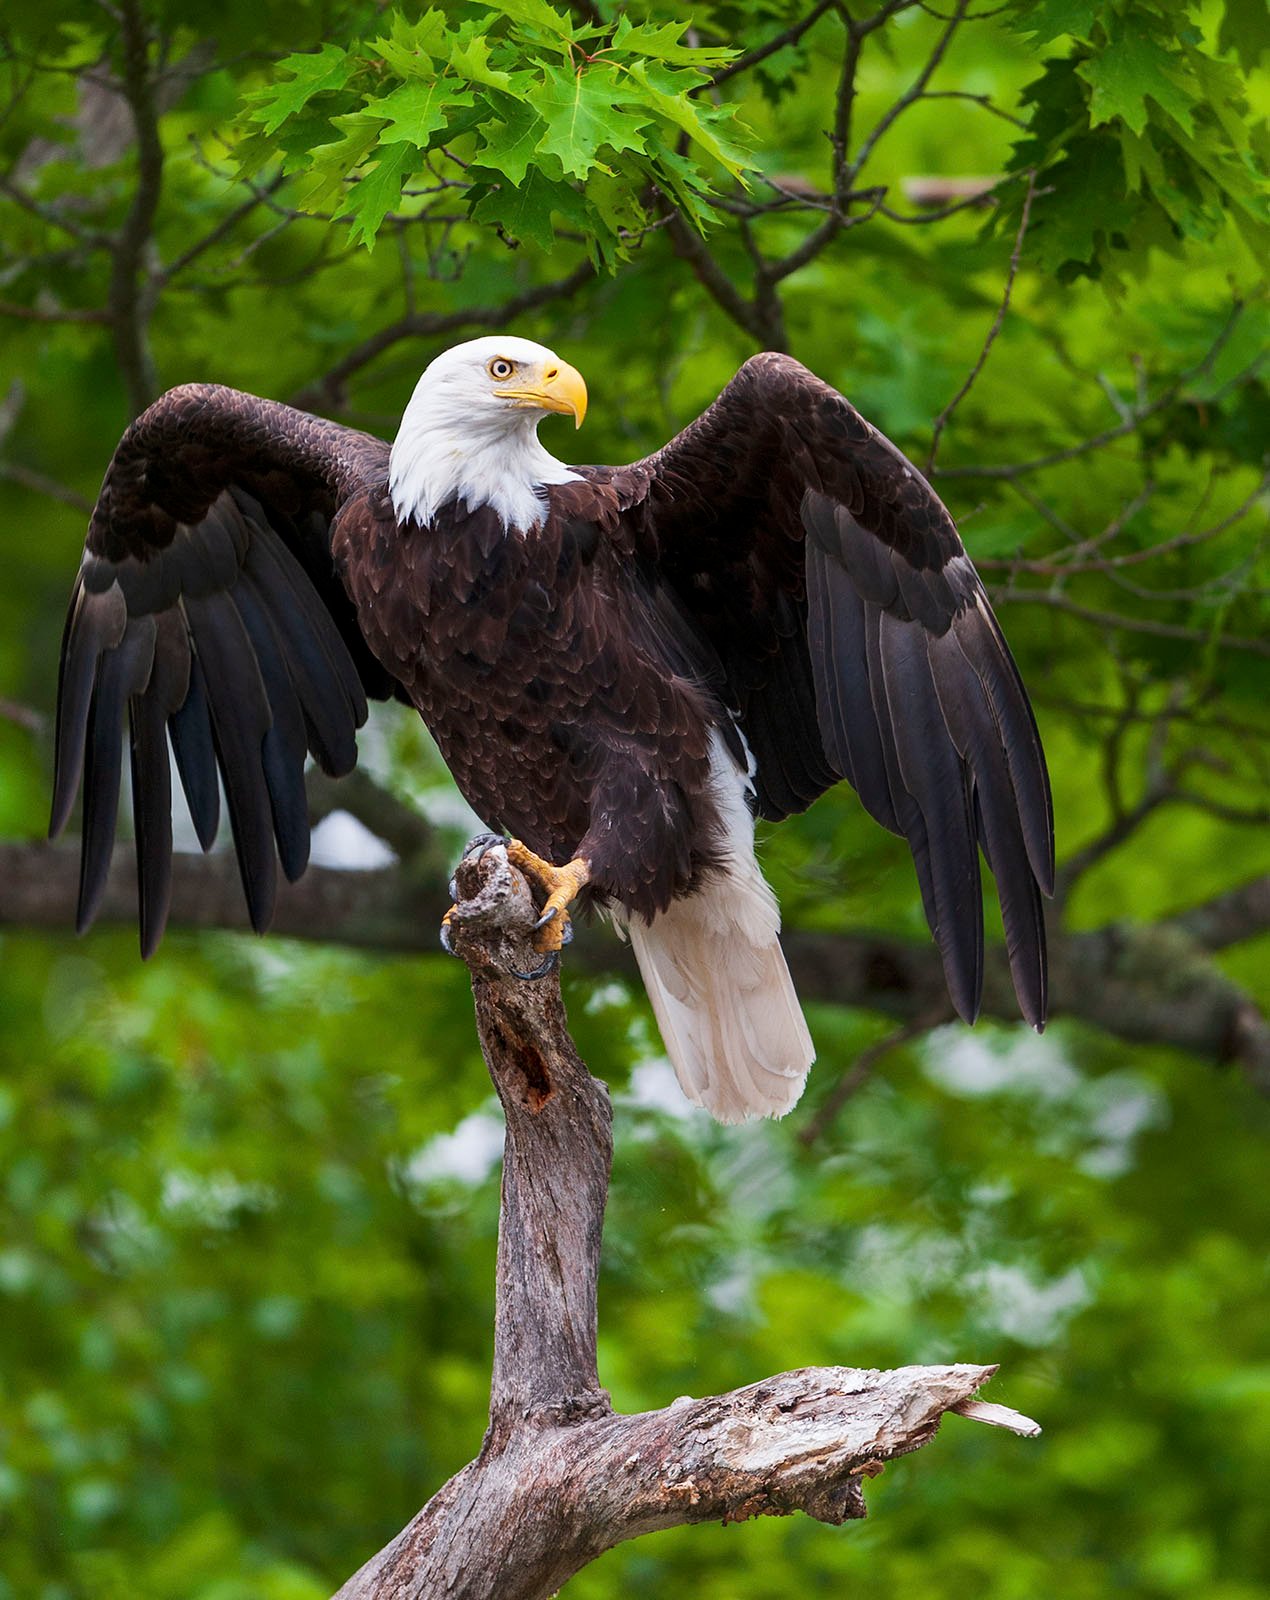 A majestic bald eagle perches on a tree branch, striking wings spread, against a backdrop of lush green foliage.